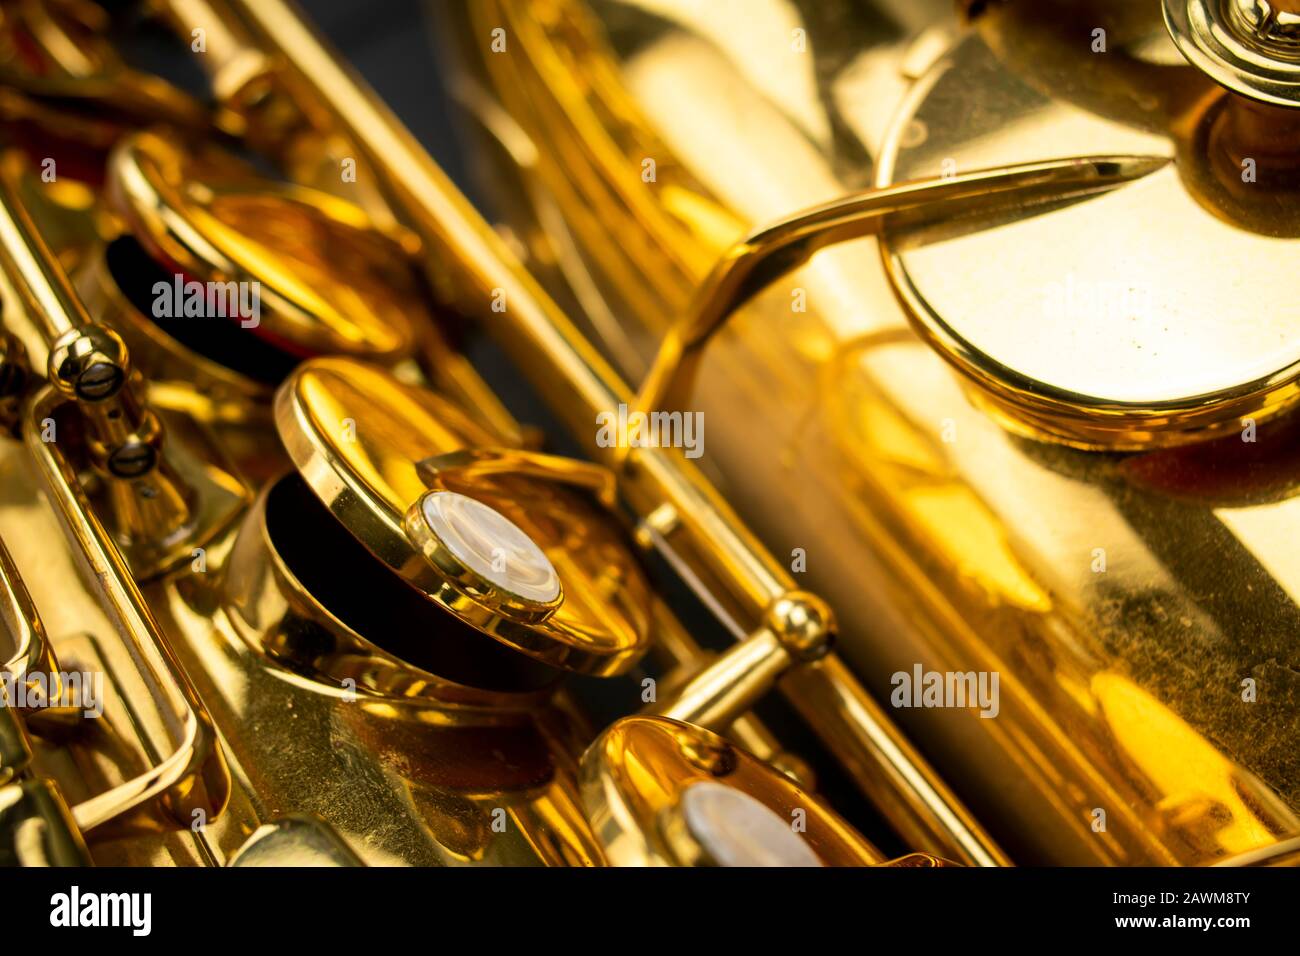 Body and keys of a golden saxophone on gray wooden background Stock Photo